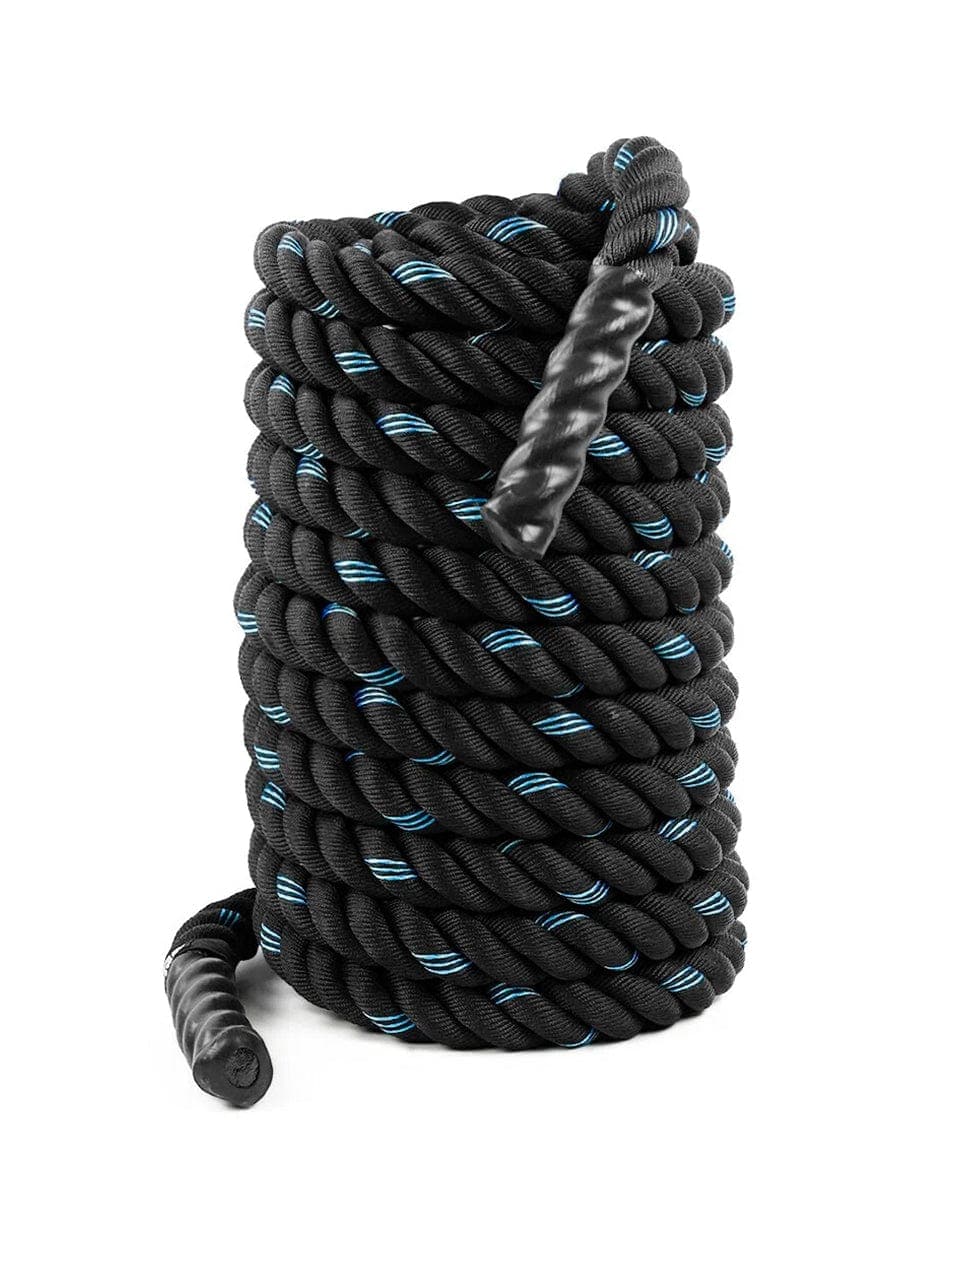 LivePro Battle Rope 9 Metre to 15 Metre with 38mm Diameter - Athletix.ae